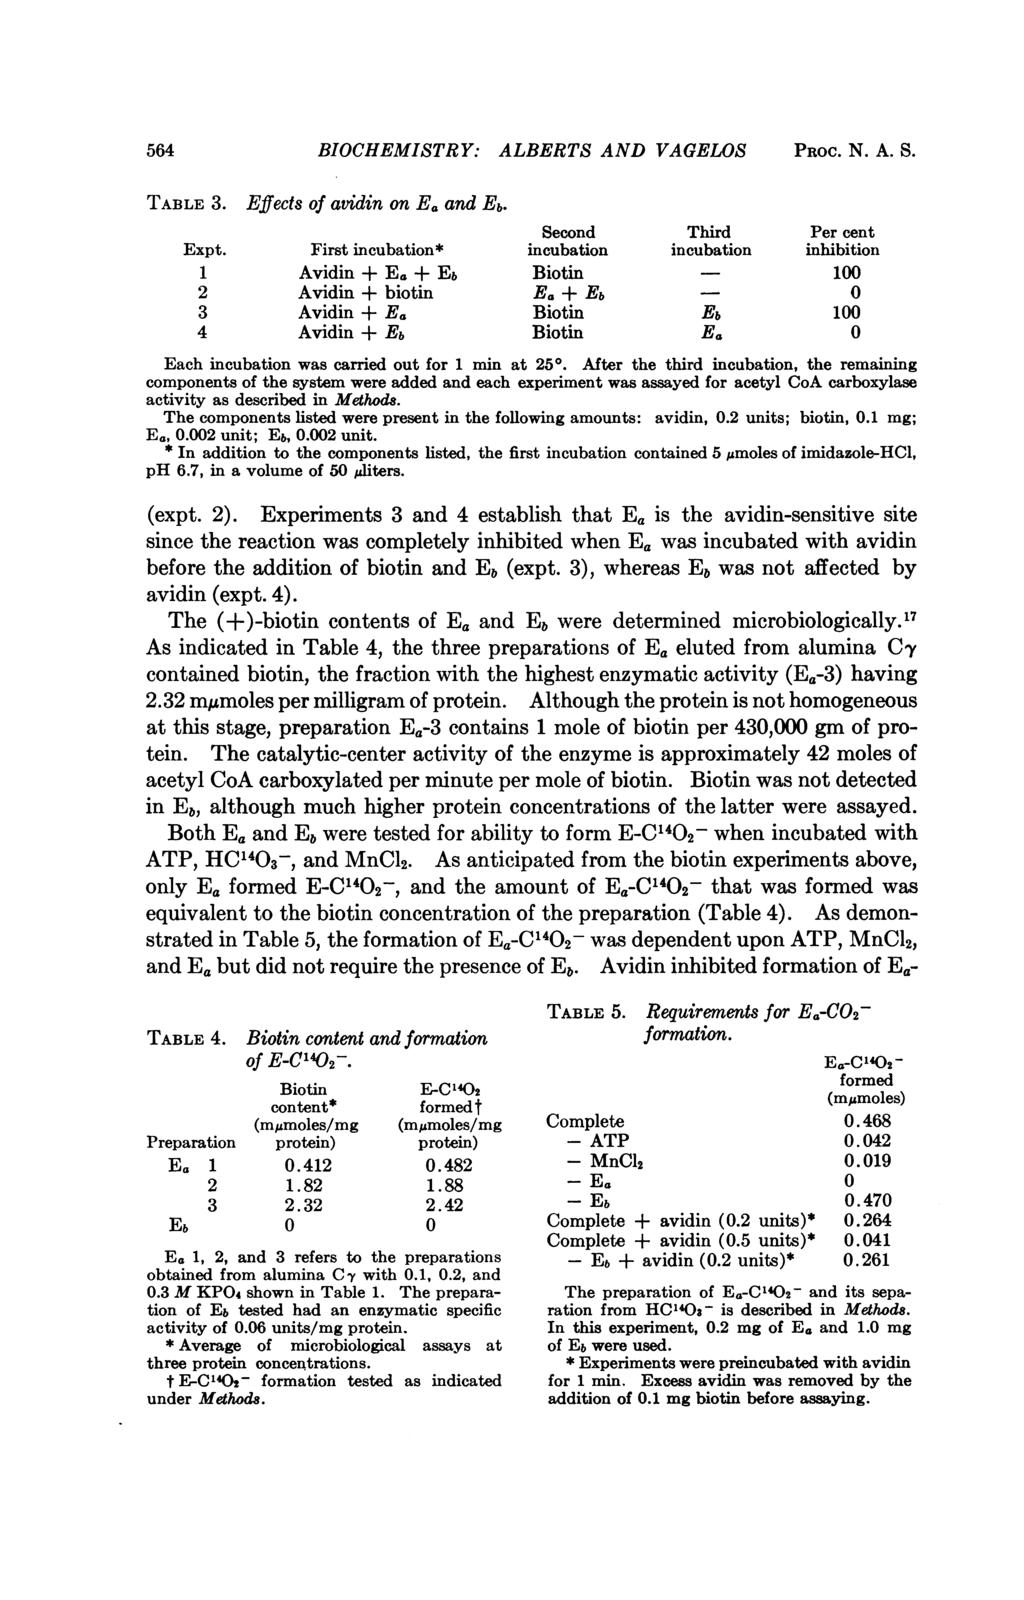 564 BIOCHEMISTRY: ALBERTS AND VAGELOS PROC. N. A. S. TABLE 3. Expt. 1 2 3 4 Effects of avidin on E. and Eb. First incubation* Avidin + E, + Eb Avidin + biotin Avidin + E.